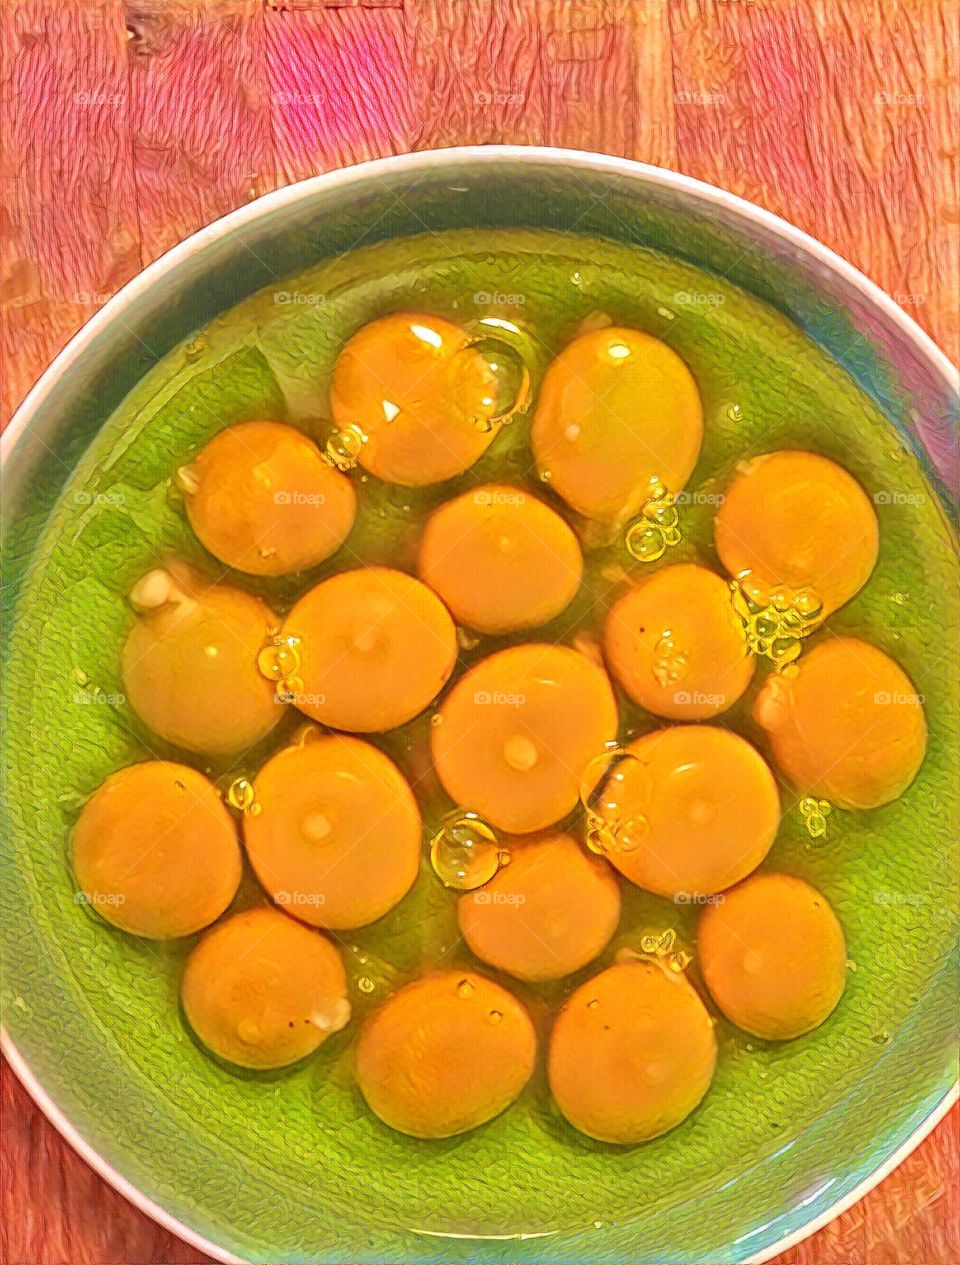 Prisma of eggs yoke and whites with a bowl